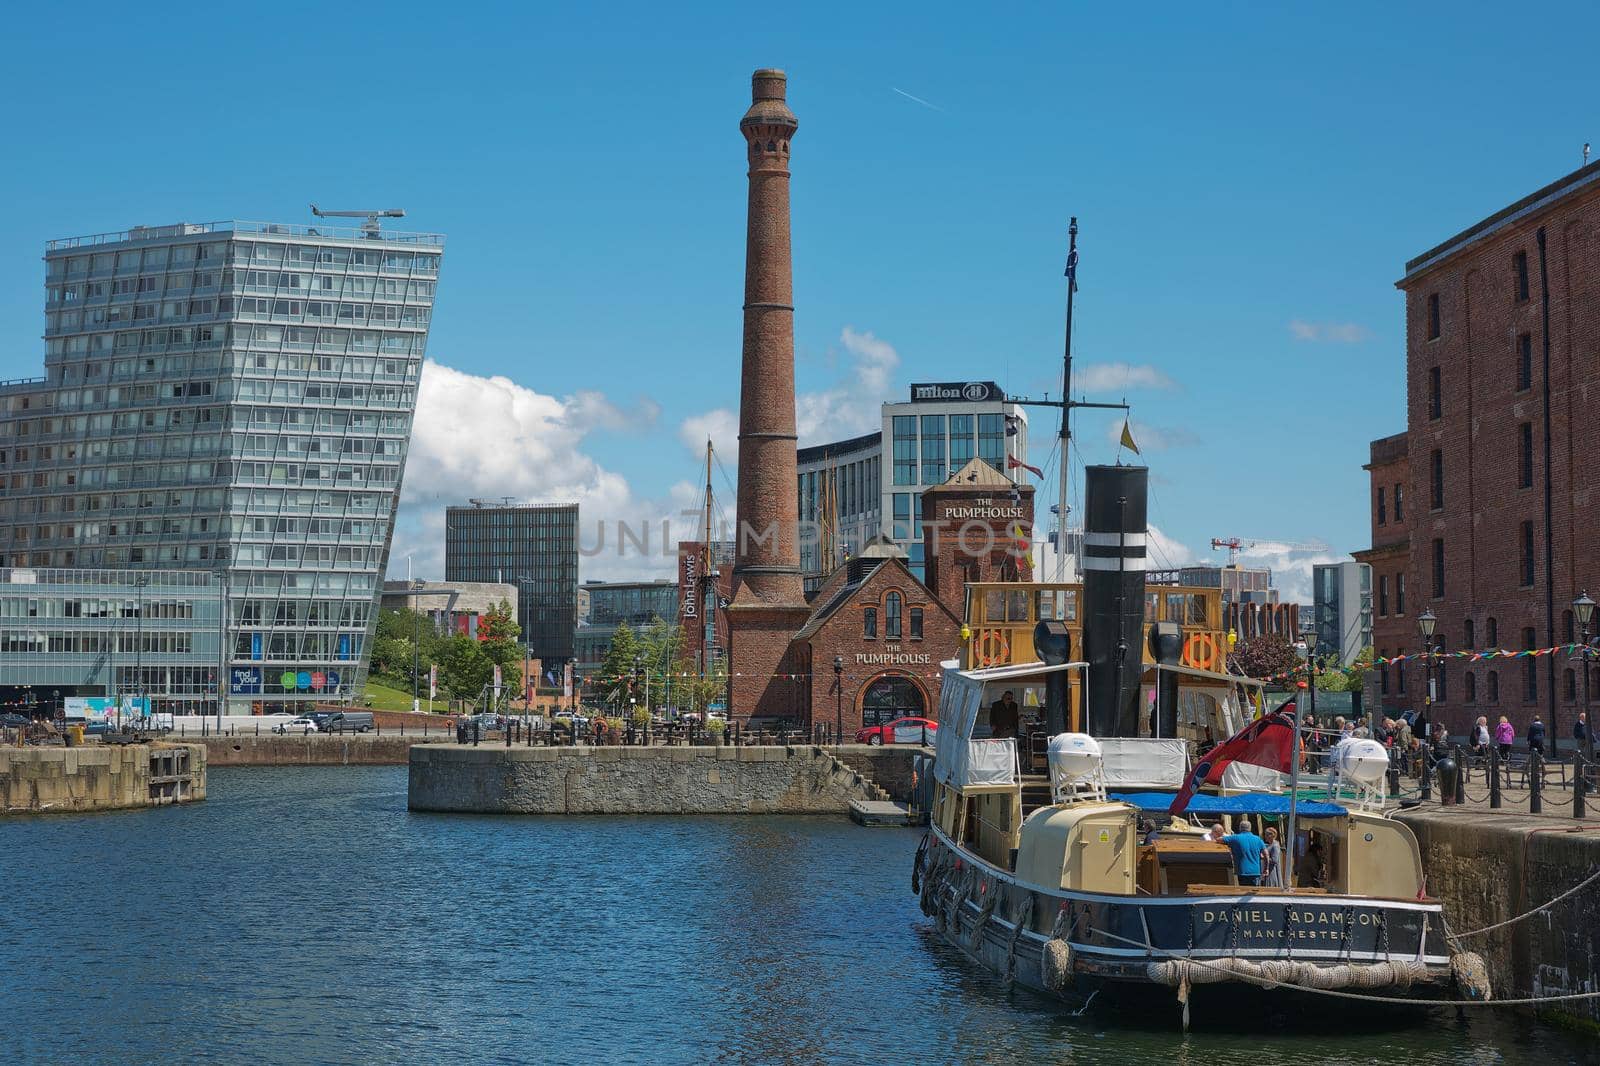 LIVERPOOL, ENGLAND, UK - JUNE 07, 2017: View of Albert Dock in Liverpool, England. The Albert Dock is a complex of dock buildings and warehouses. First non-combustible warehouse system in the world.